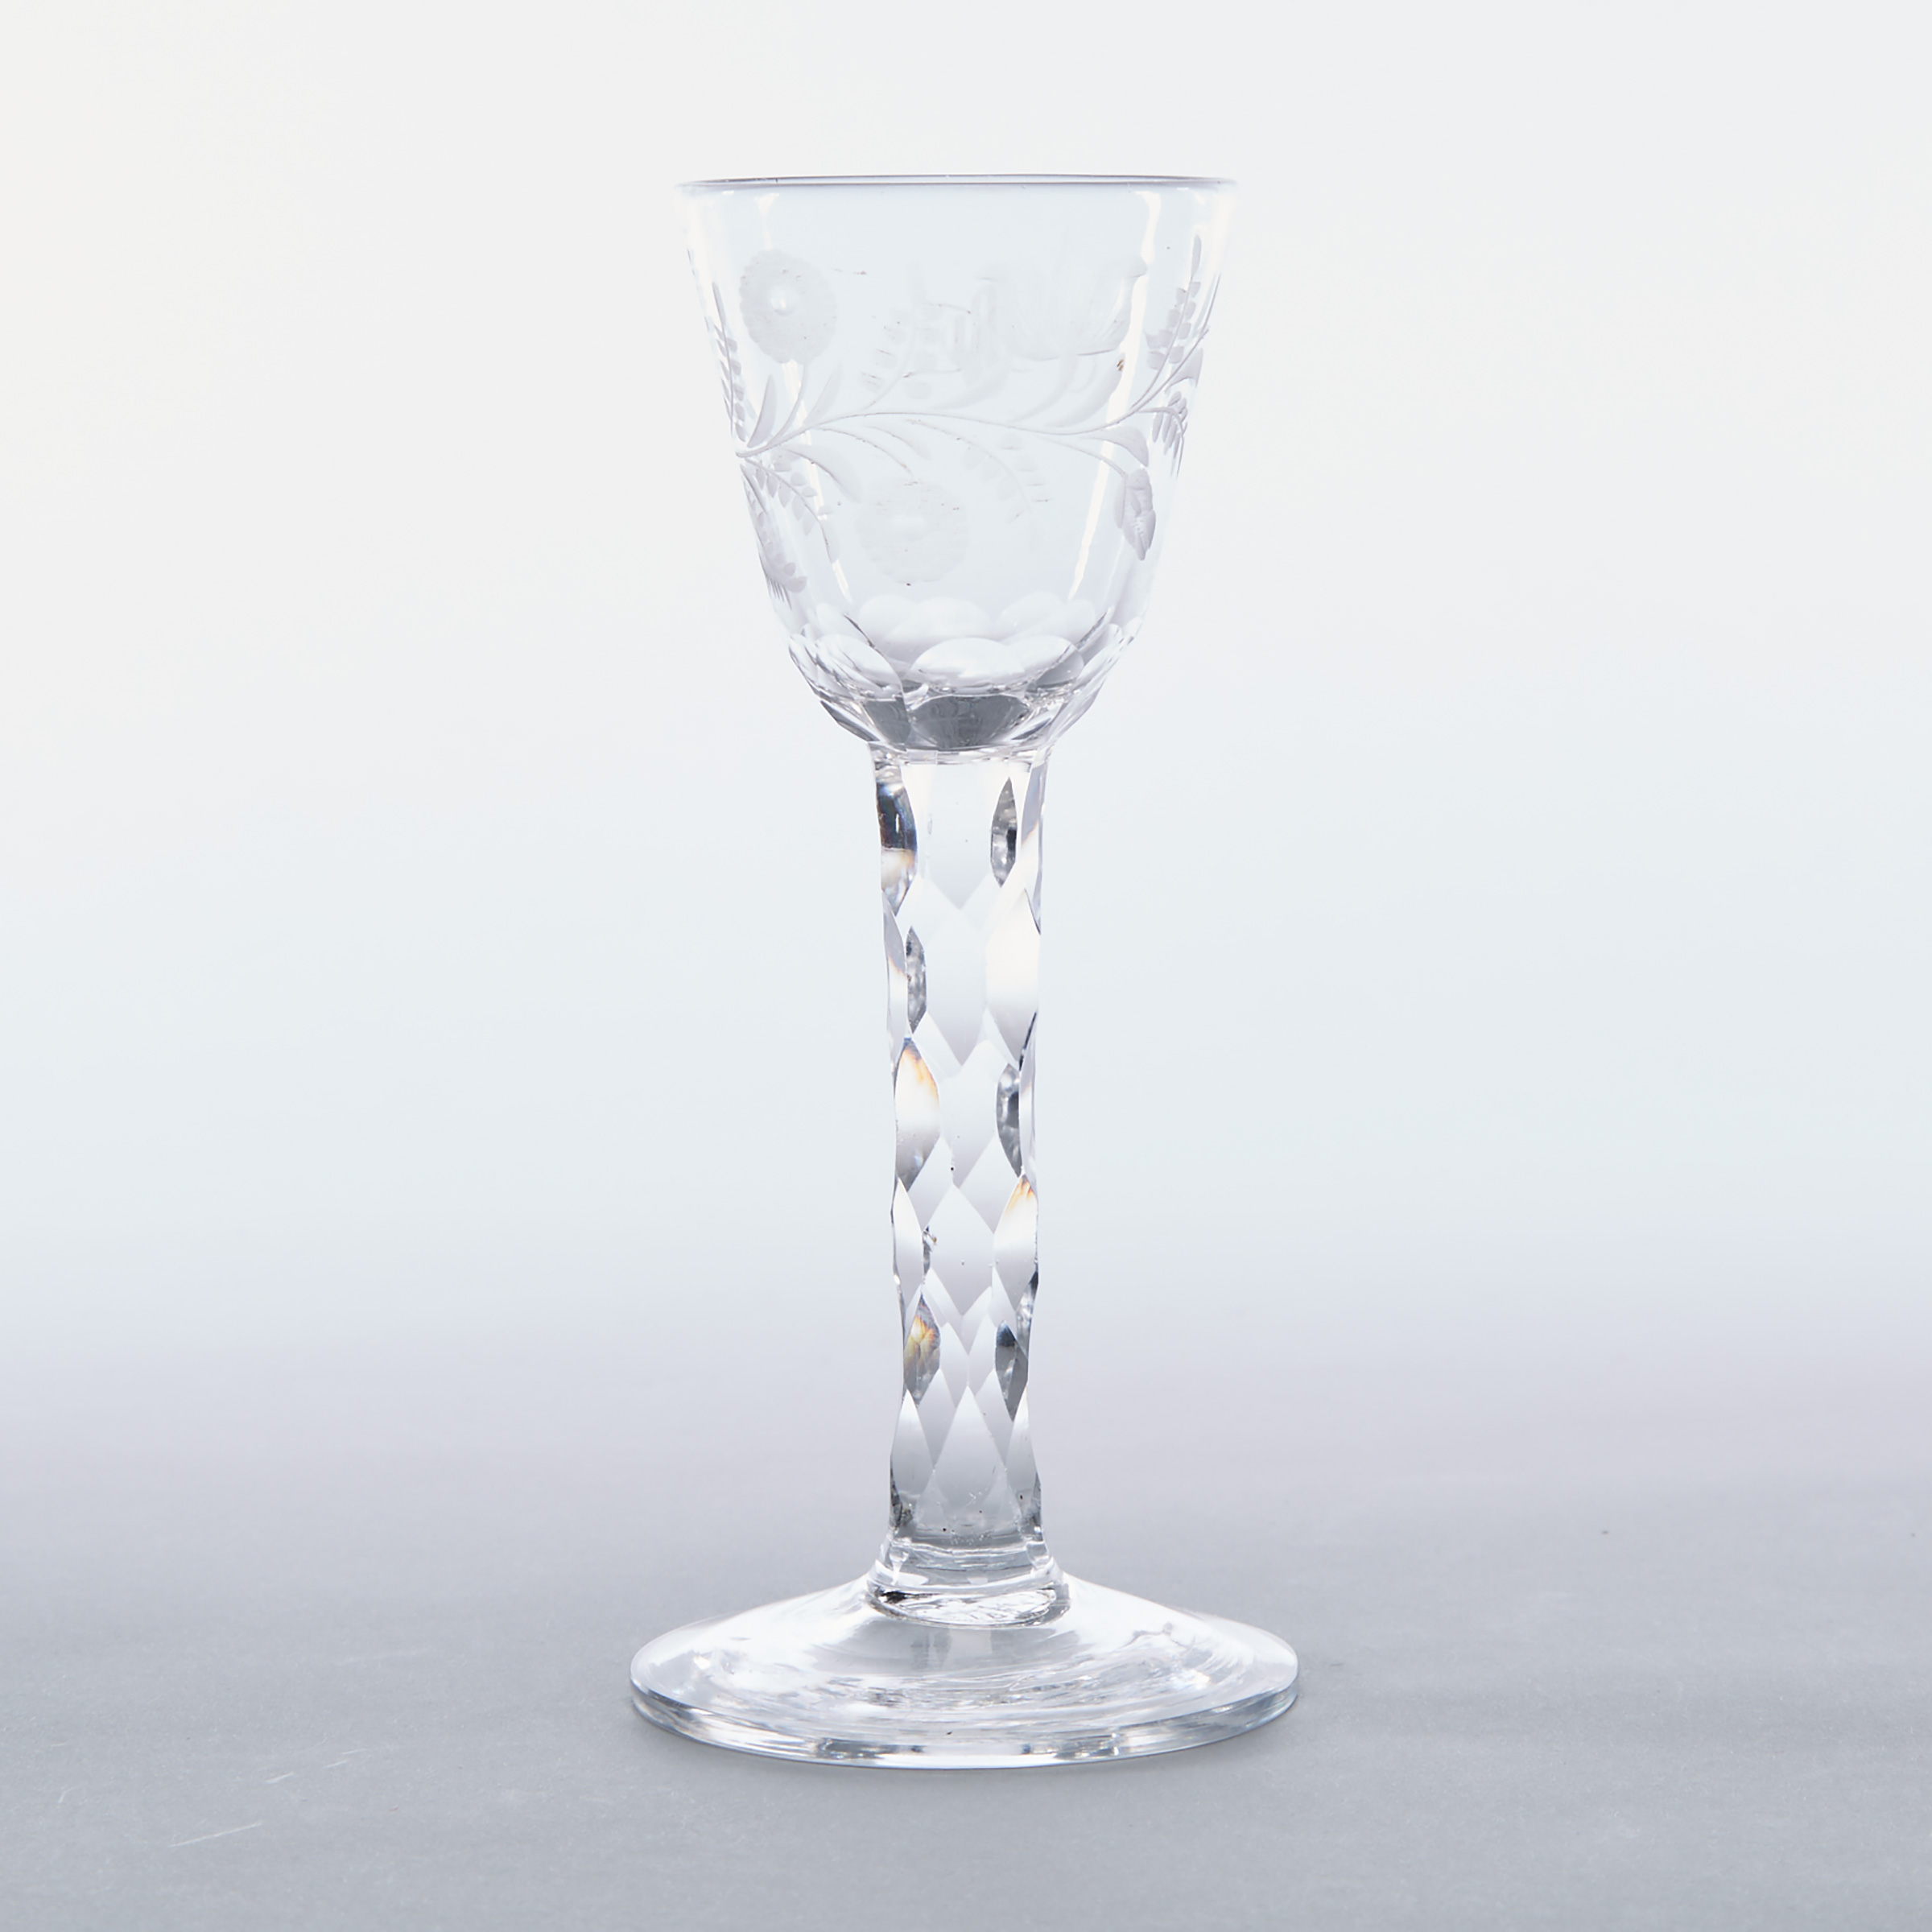 English Engraved Faceted Stemmed Wine Glass, c.1765-80